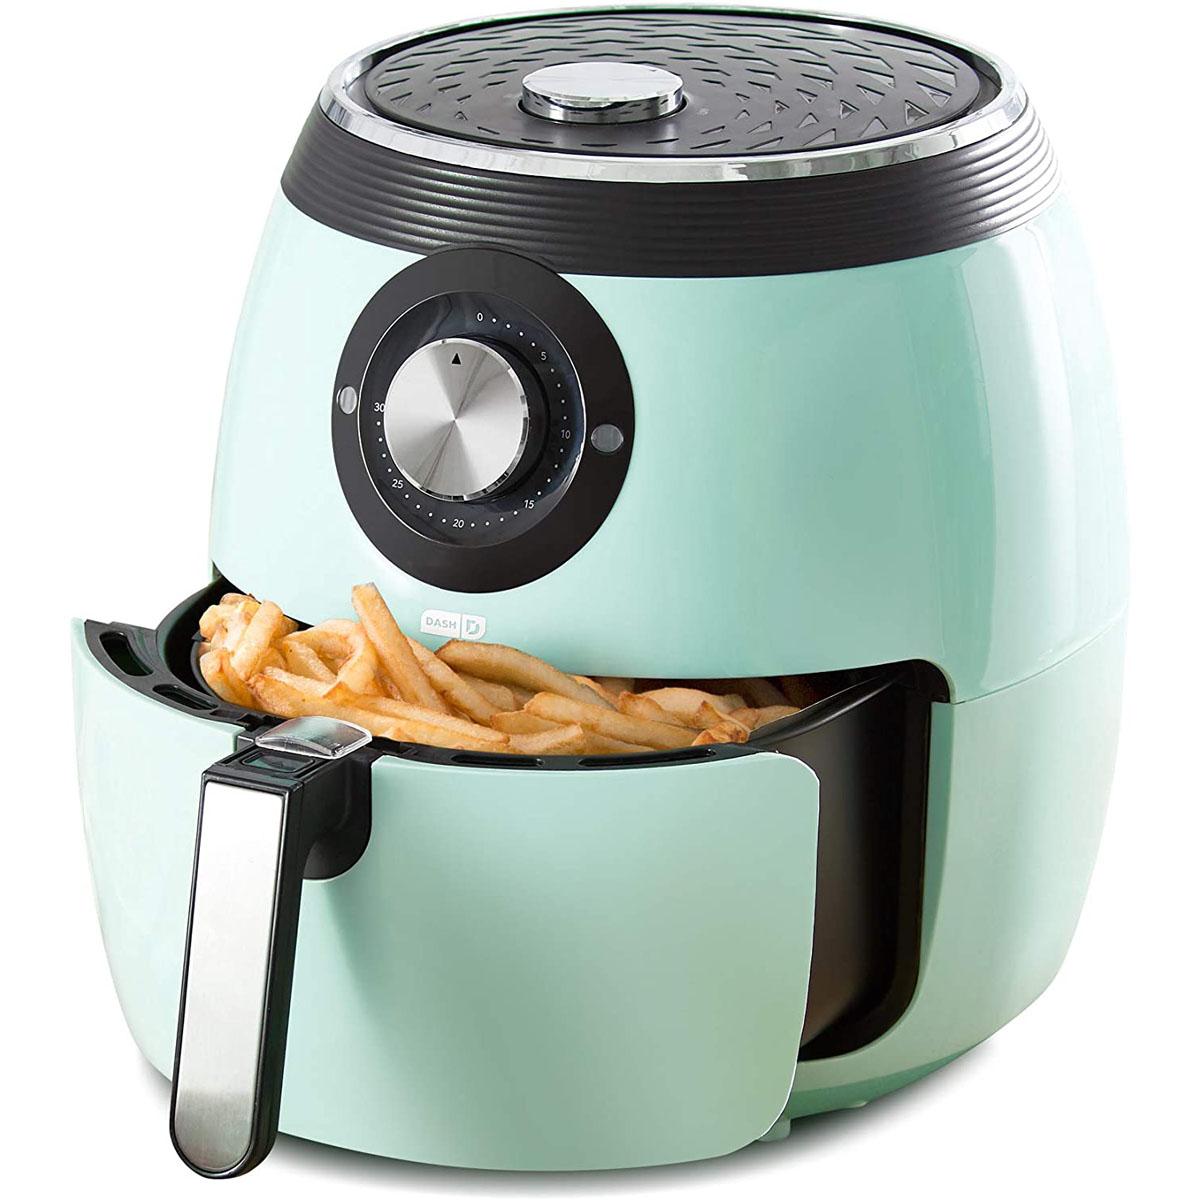 Dash Deluxe Electric Air Fryer for $69.99 Shipped